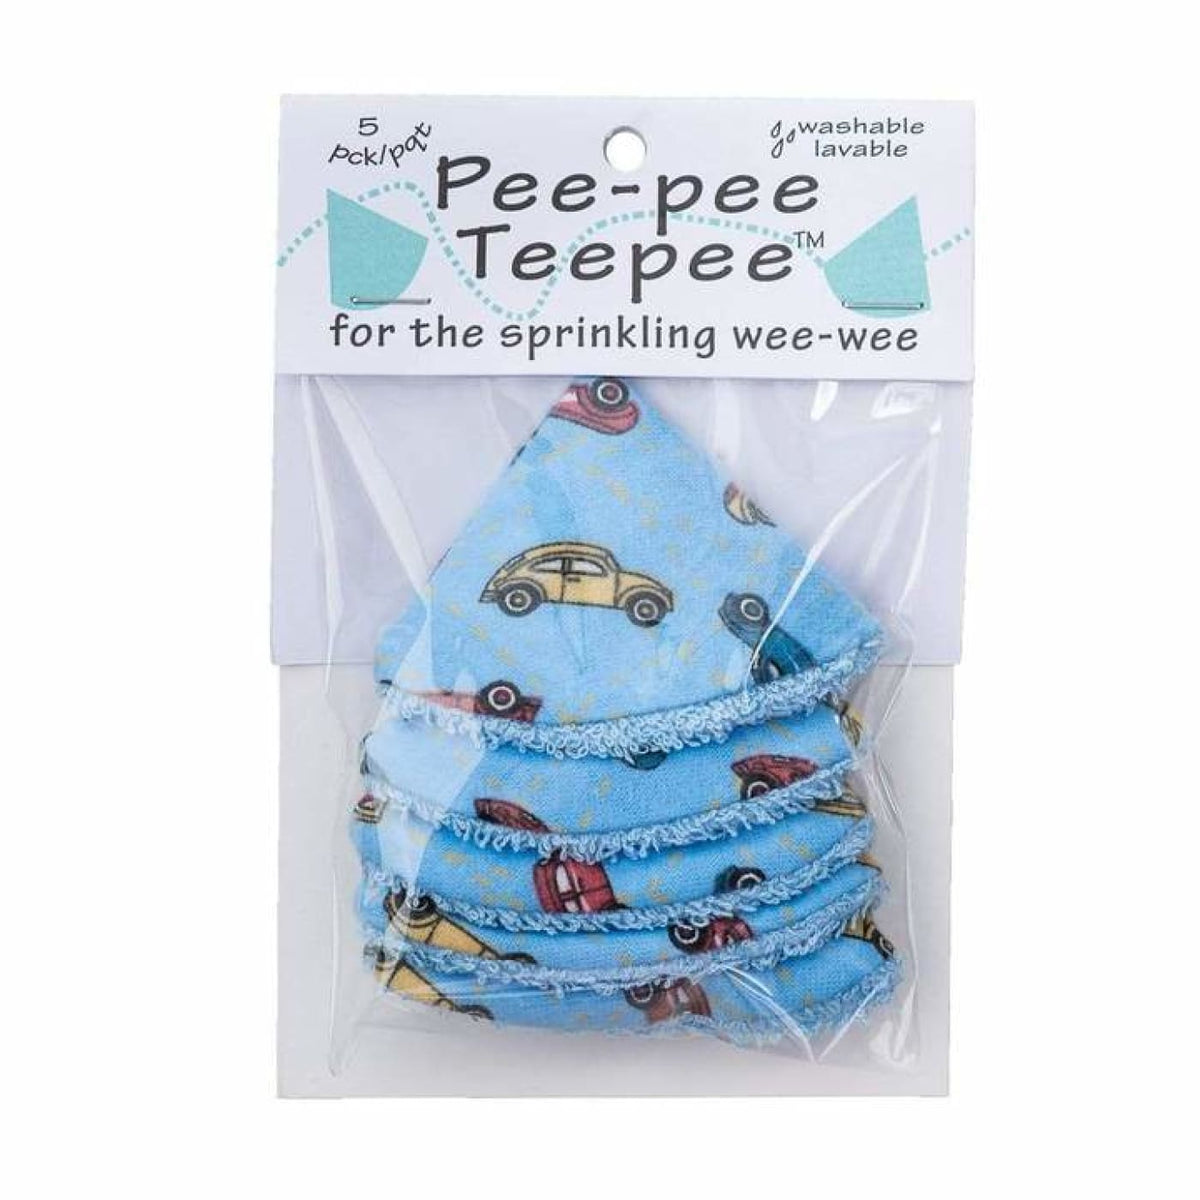 Pee-pee Teepee - Cars - Cars - BATHTIME &amp; CHANGING - NAPPIES/WIPES/ACCESSORIES